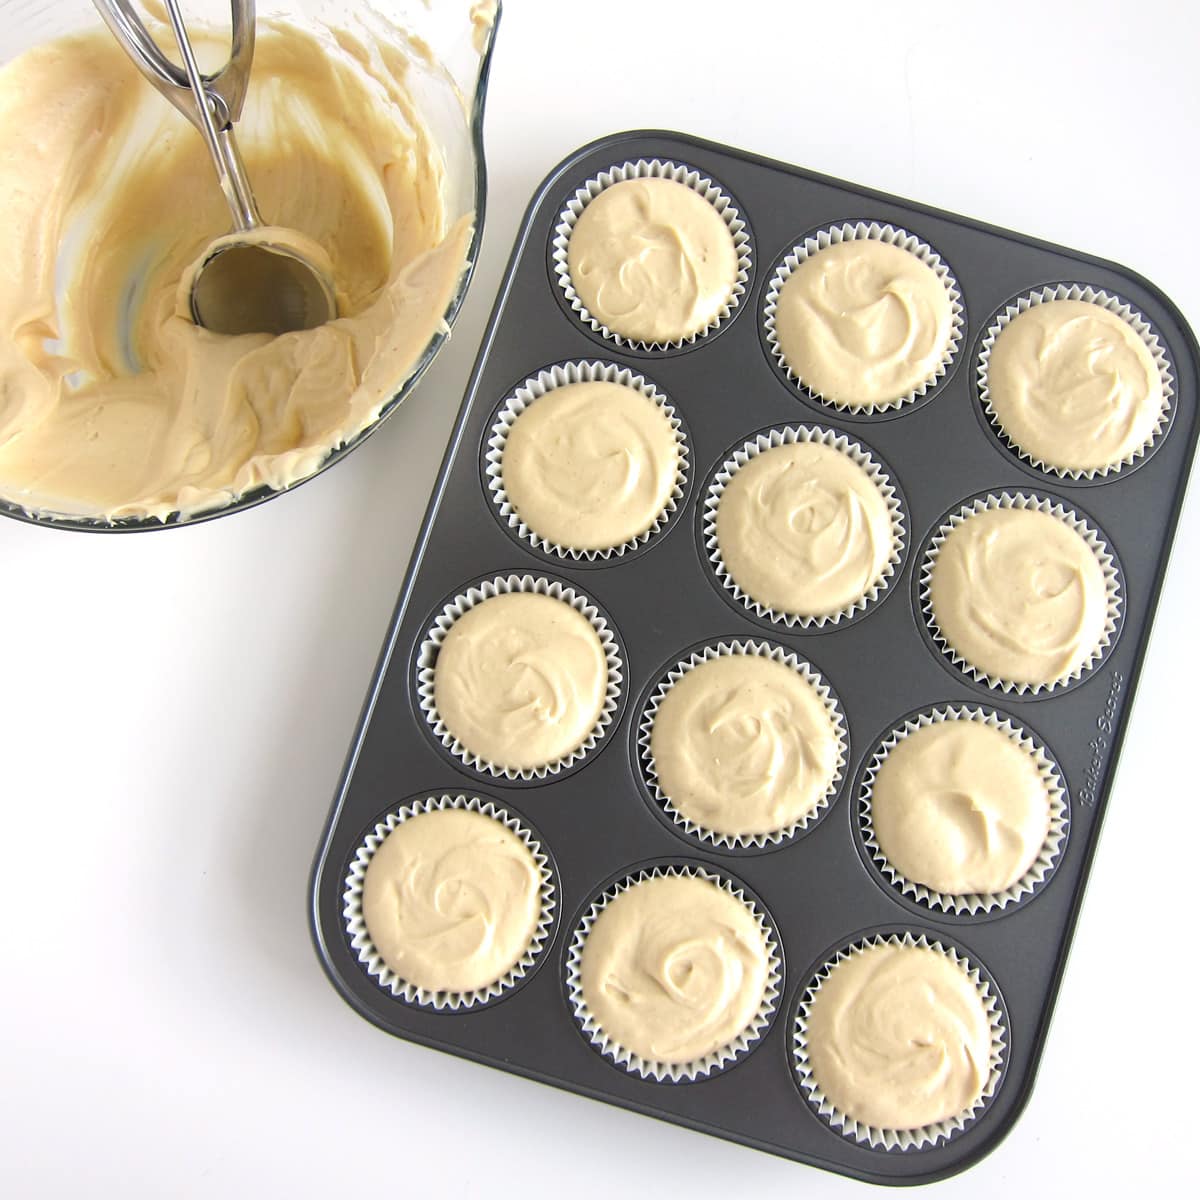 Peanut butter cheesecake filling spooned into cupcake wrappers in a muffin tin.